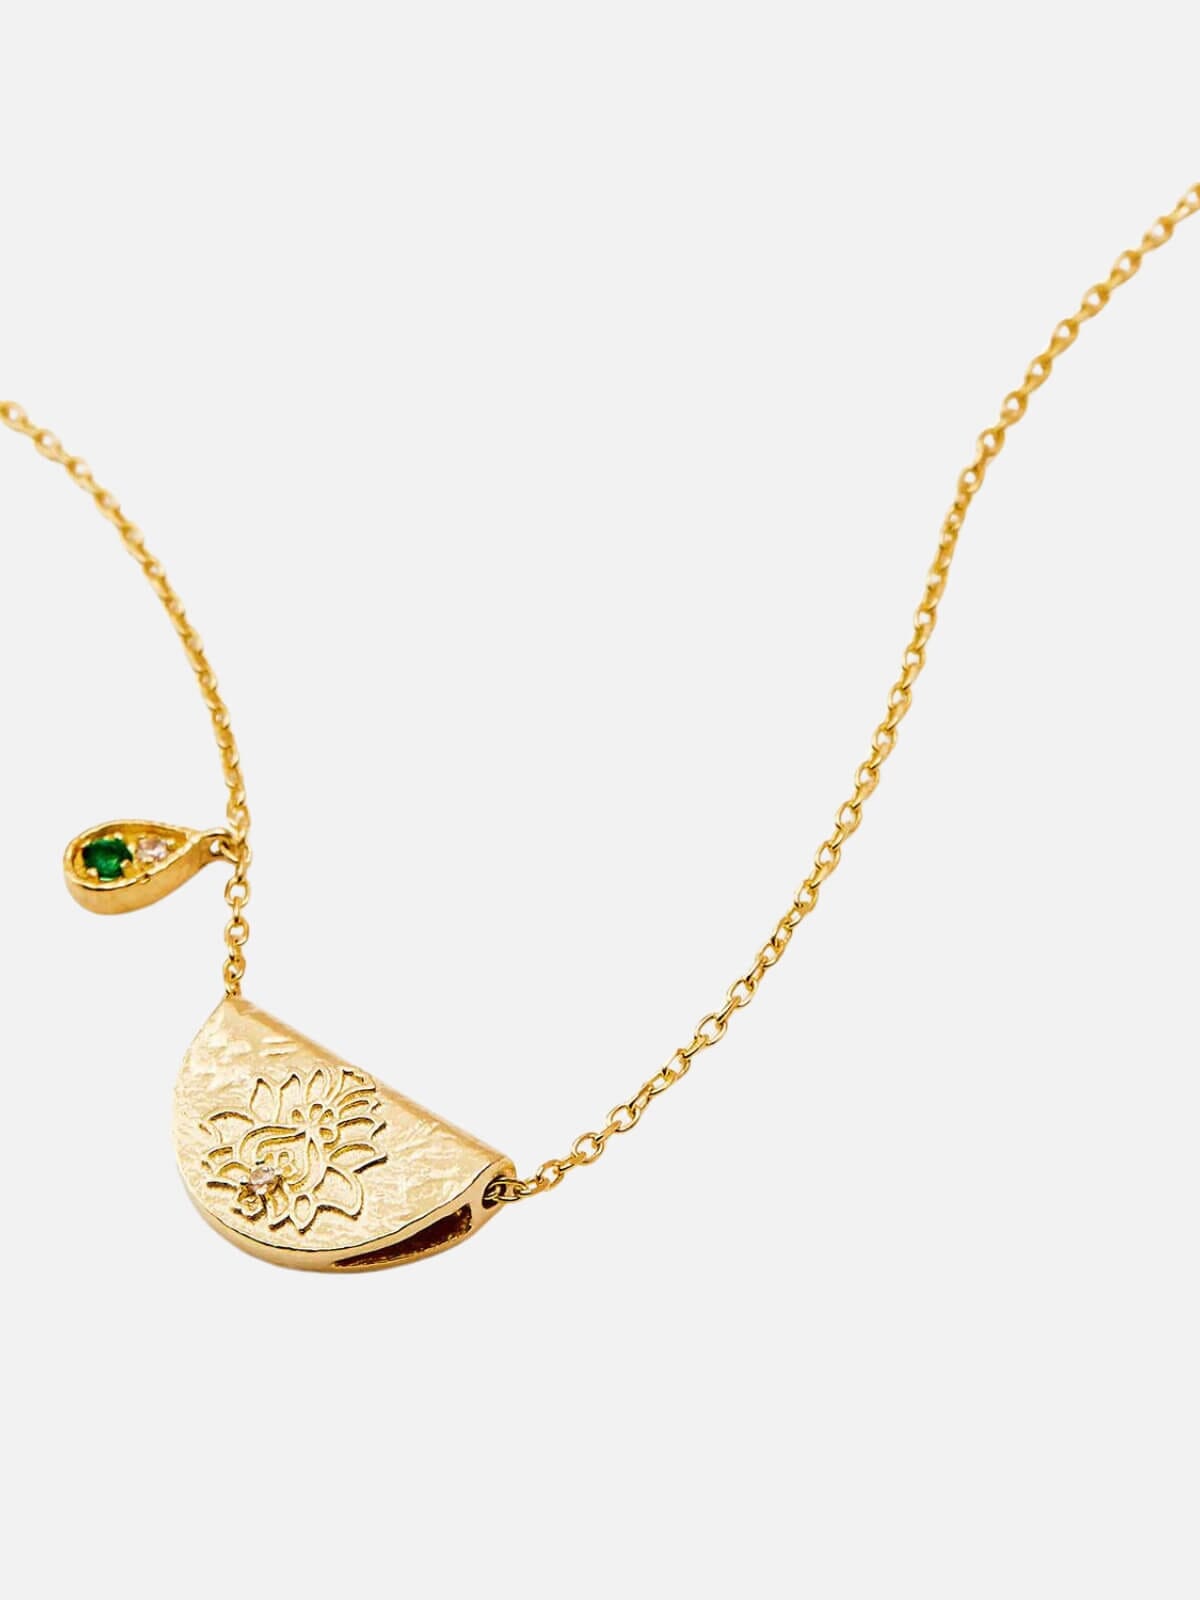 By Charlotte | Lotus Birthstone Necklace - May | Emerald - Gold | Perlu